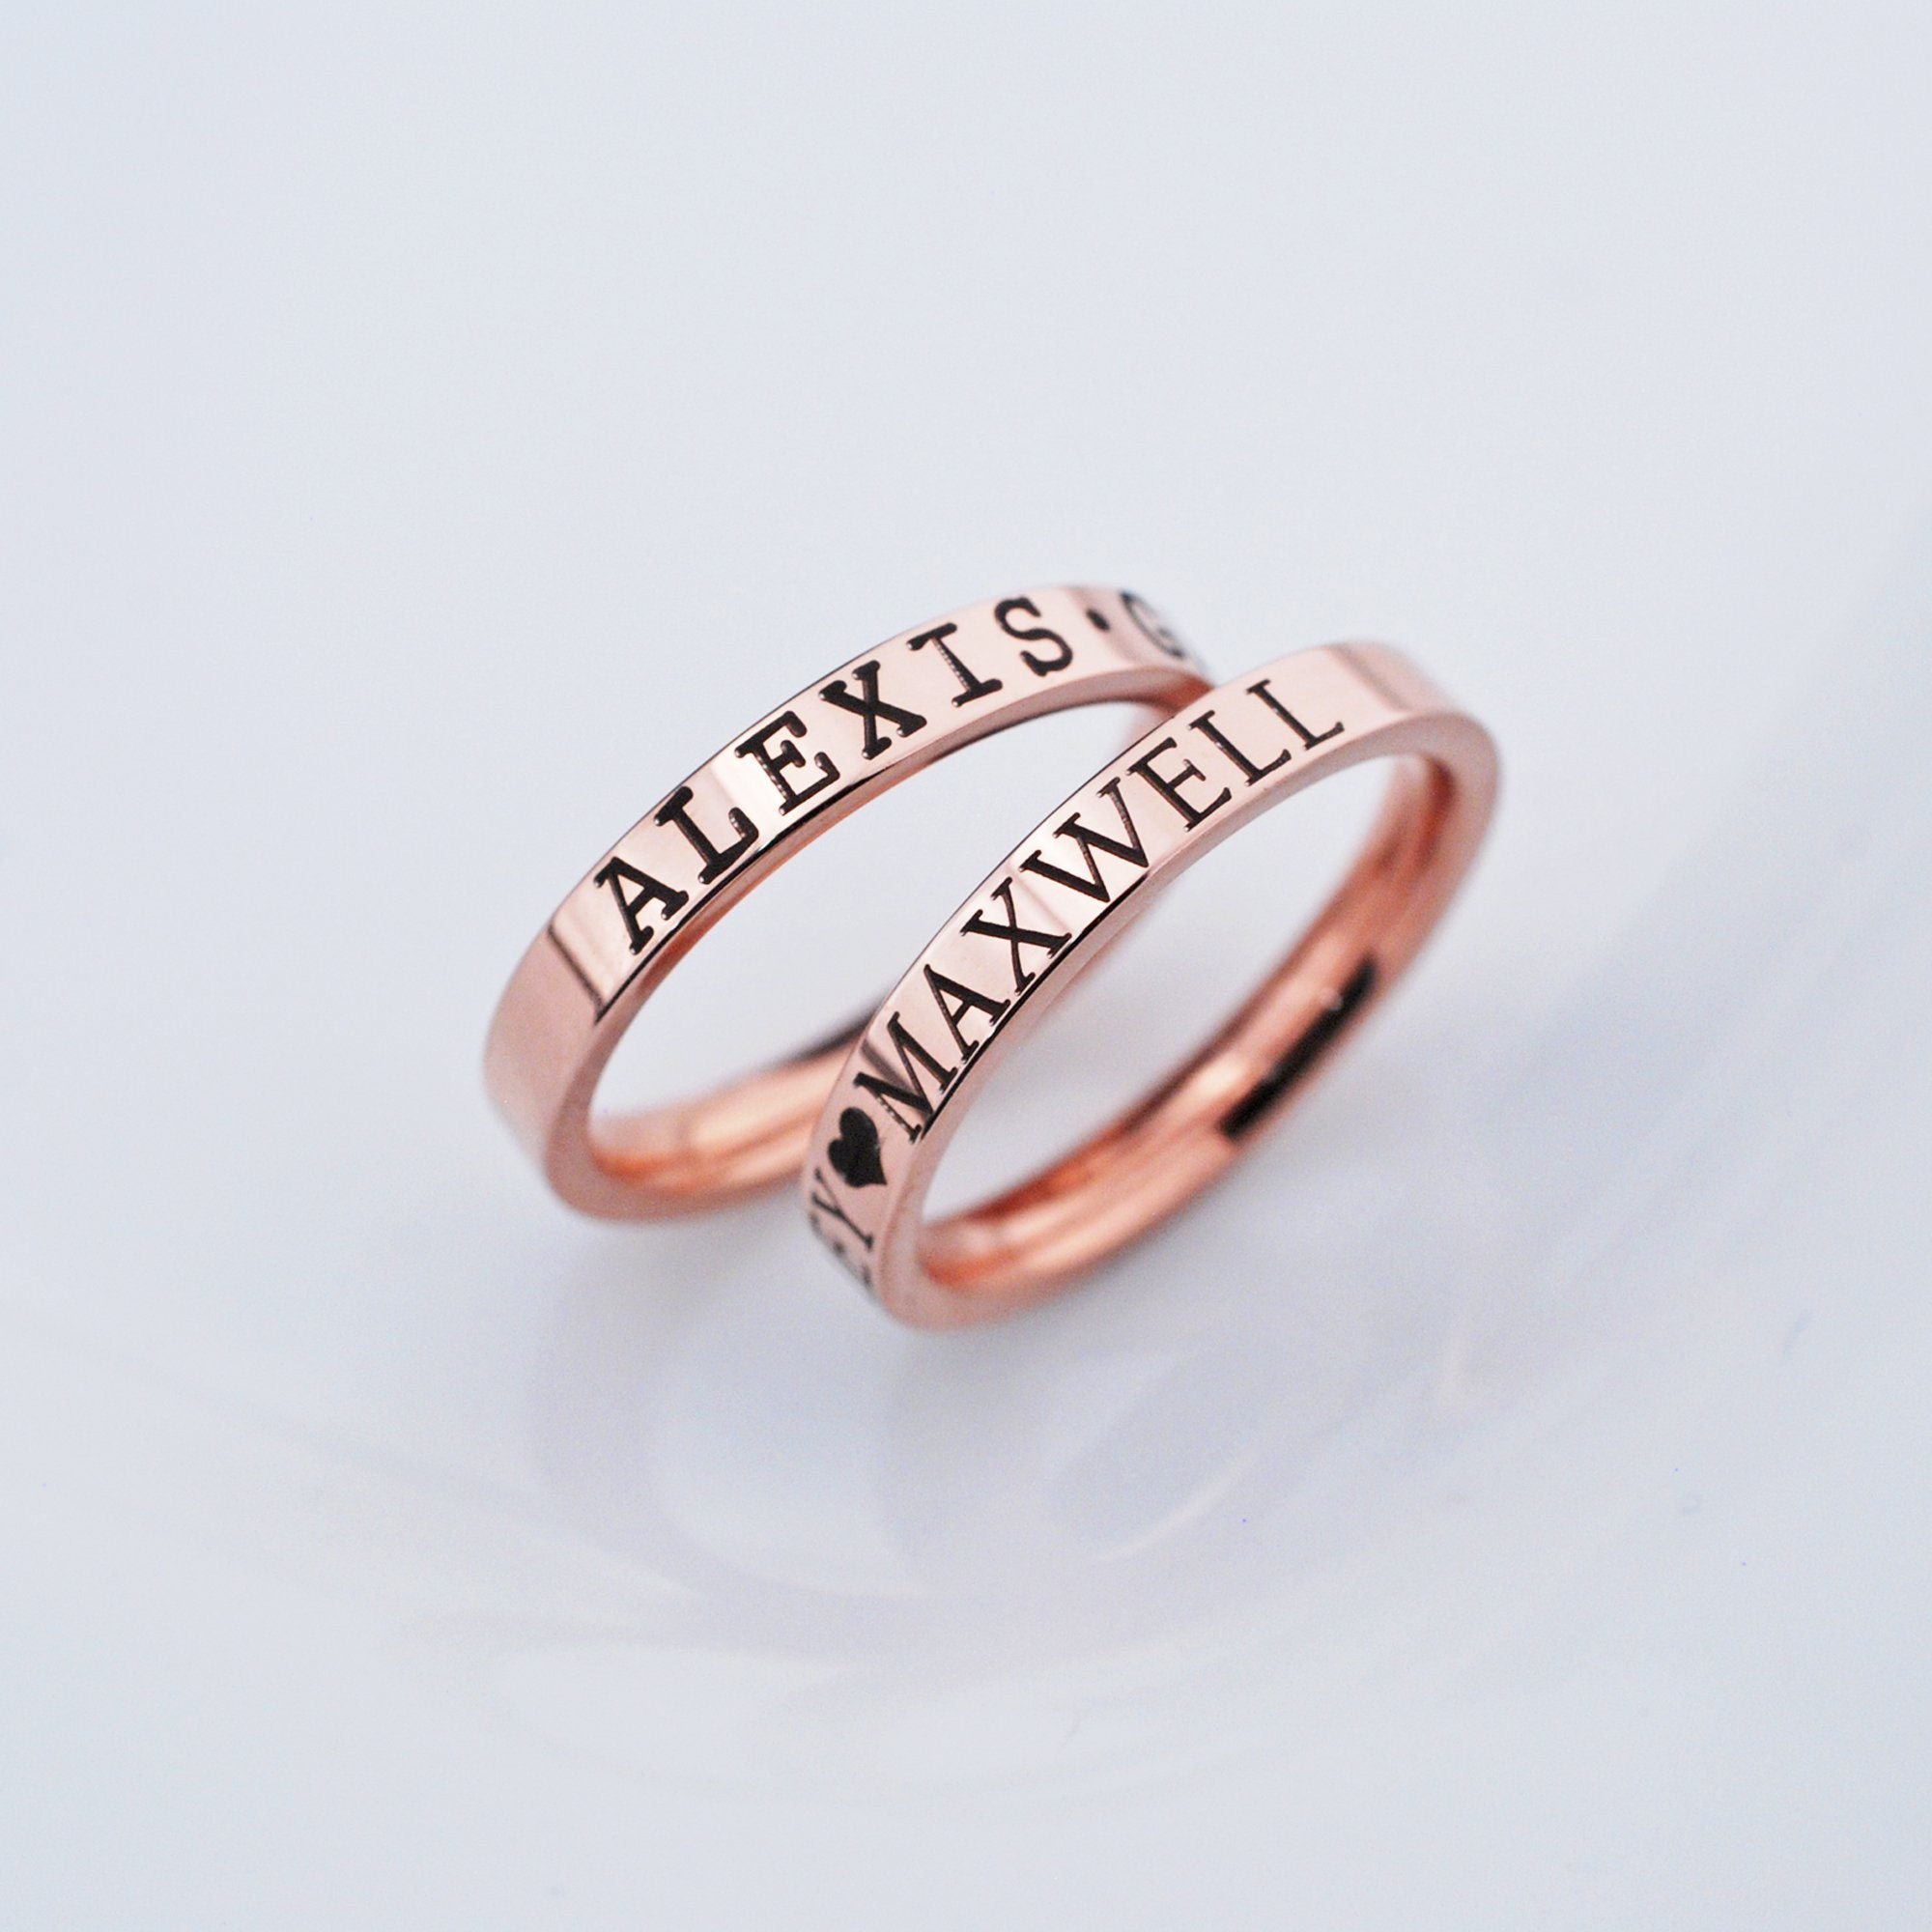 Custom Name Ring, Gold Name Ring, Prince Crown Name Ring, Wedding Gift,  Custom Engraved Ring, Personalized Name Rings, Gift for Her - Etsy